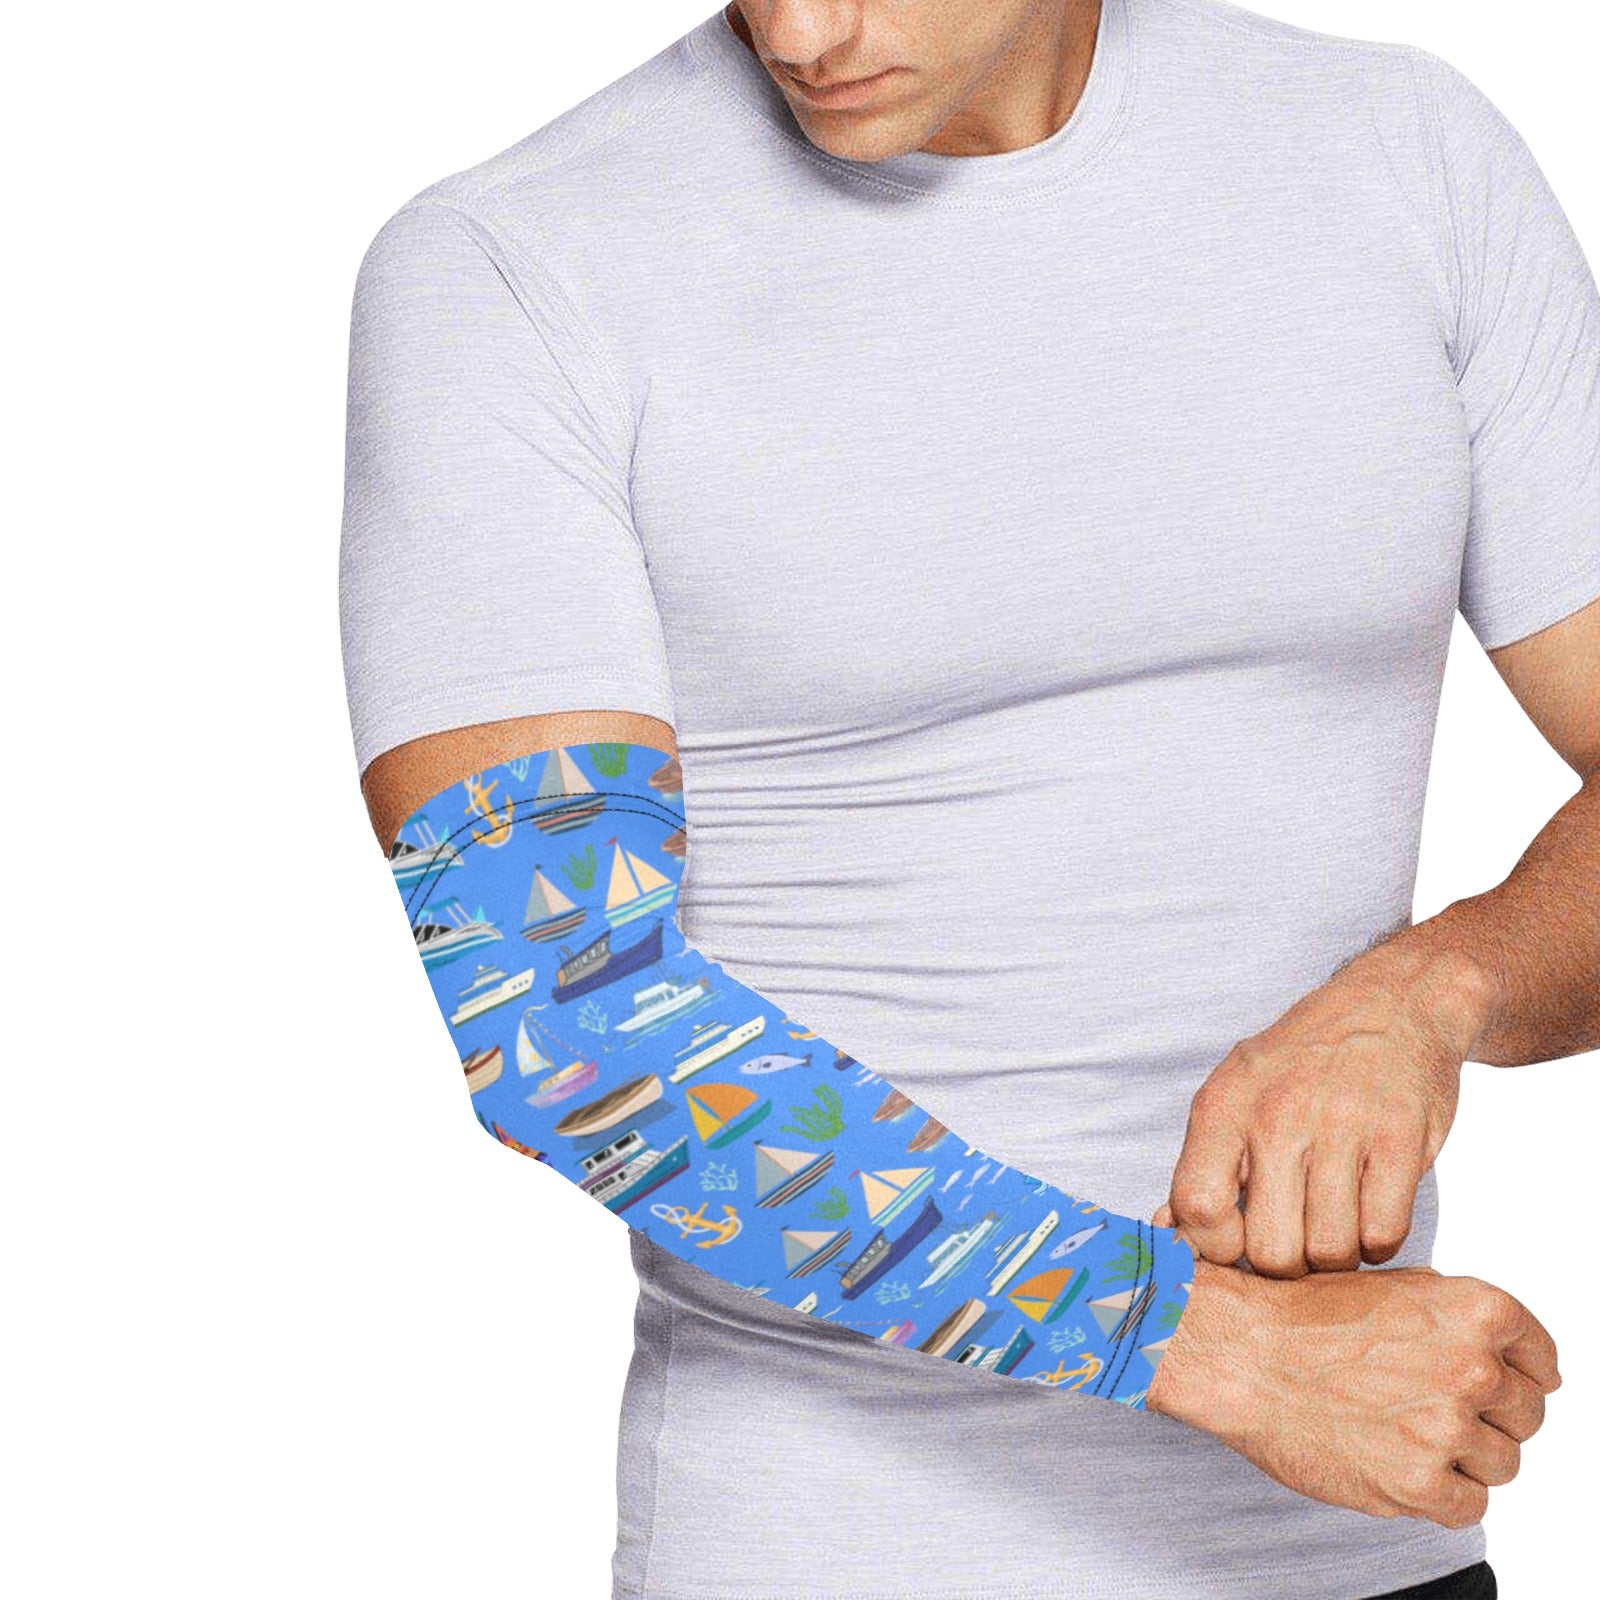 Graphic Nautical Blue Weather Protection Arm Sleeves